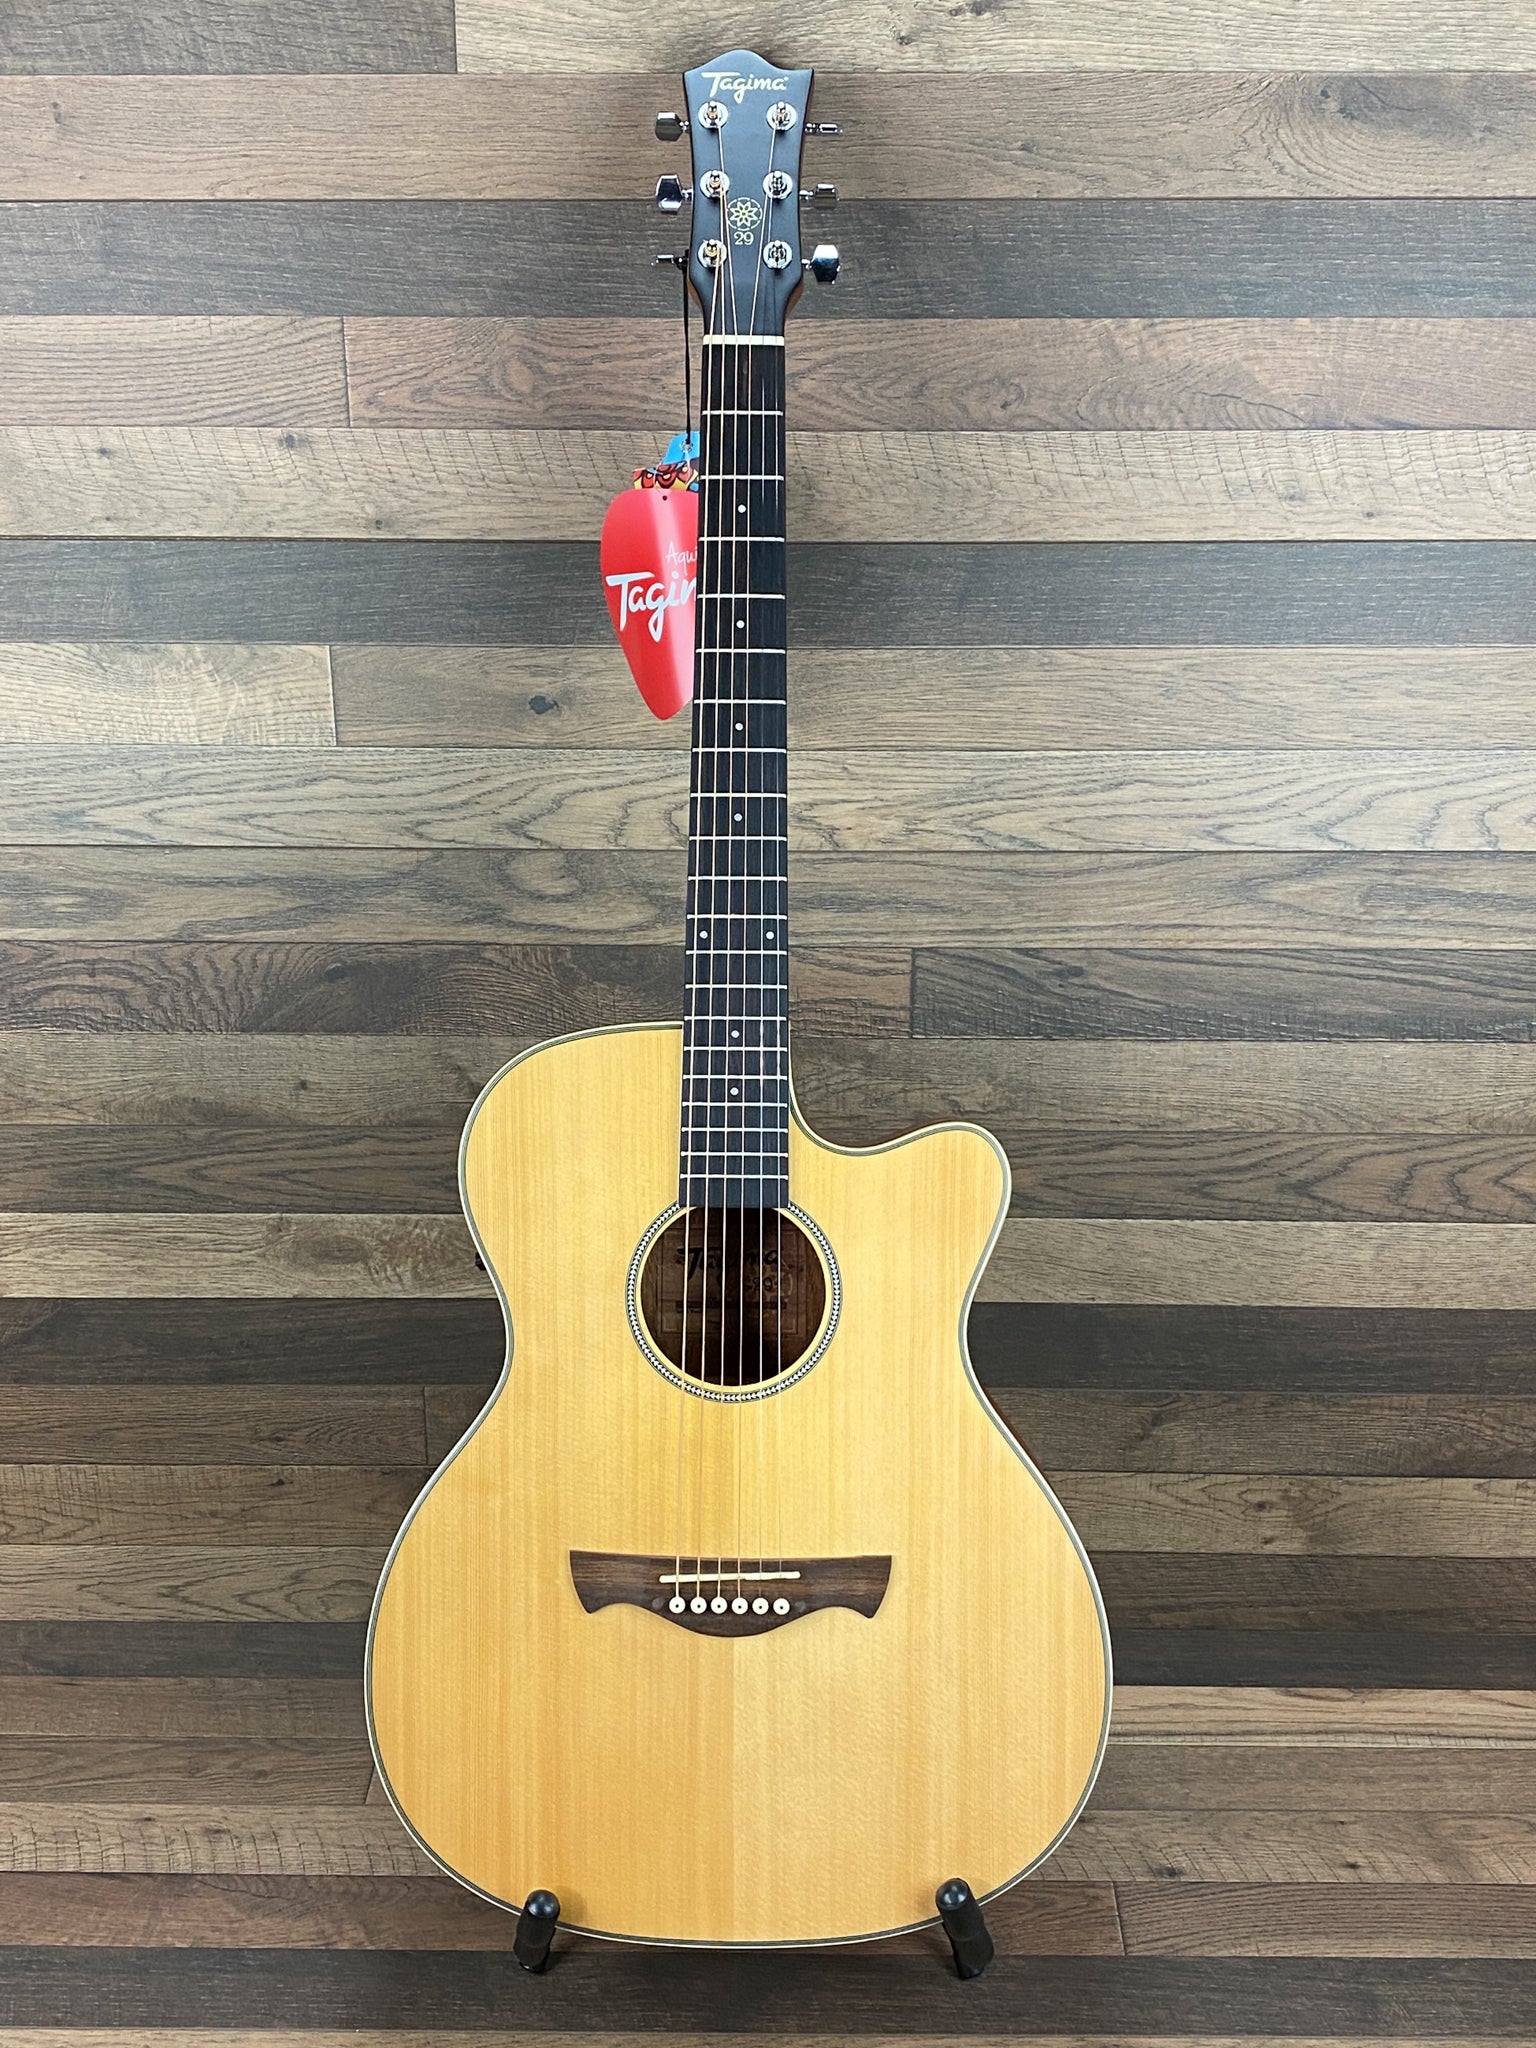 Tagima TW29EQNTS Right Handed Acoustic Electric Guitar Natural Satin Finish